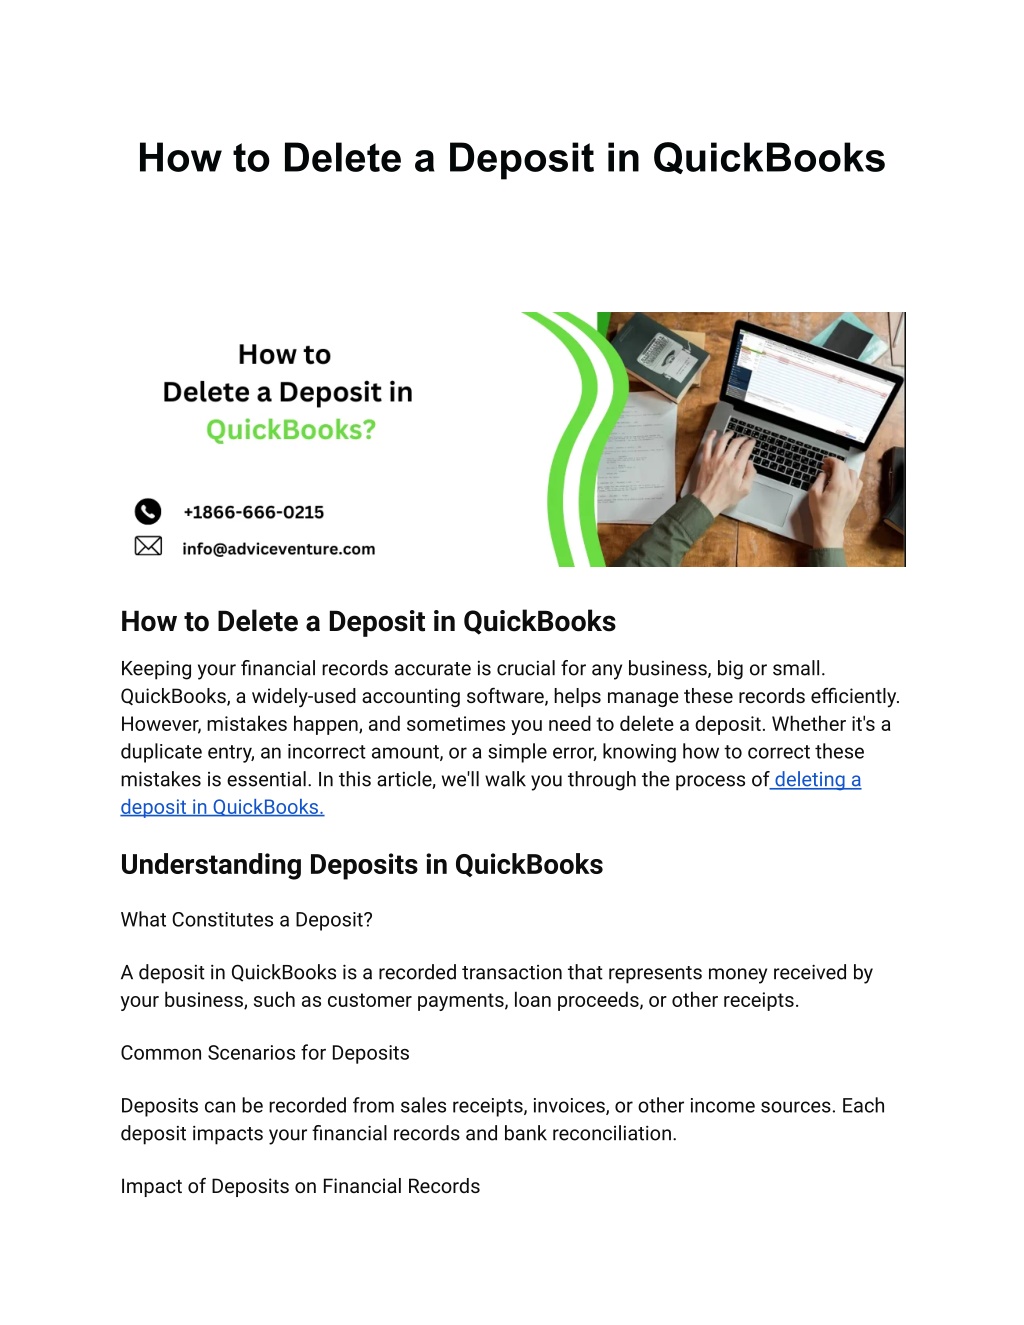 how to delete a deposit in quickbooks l.w